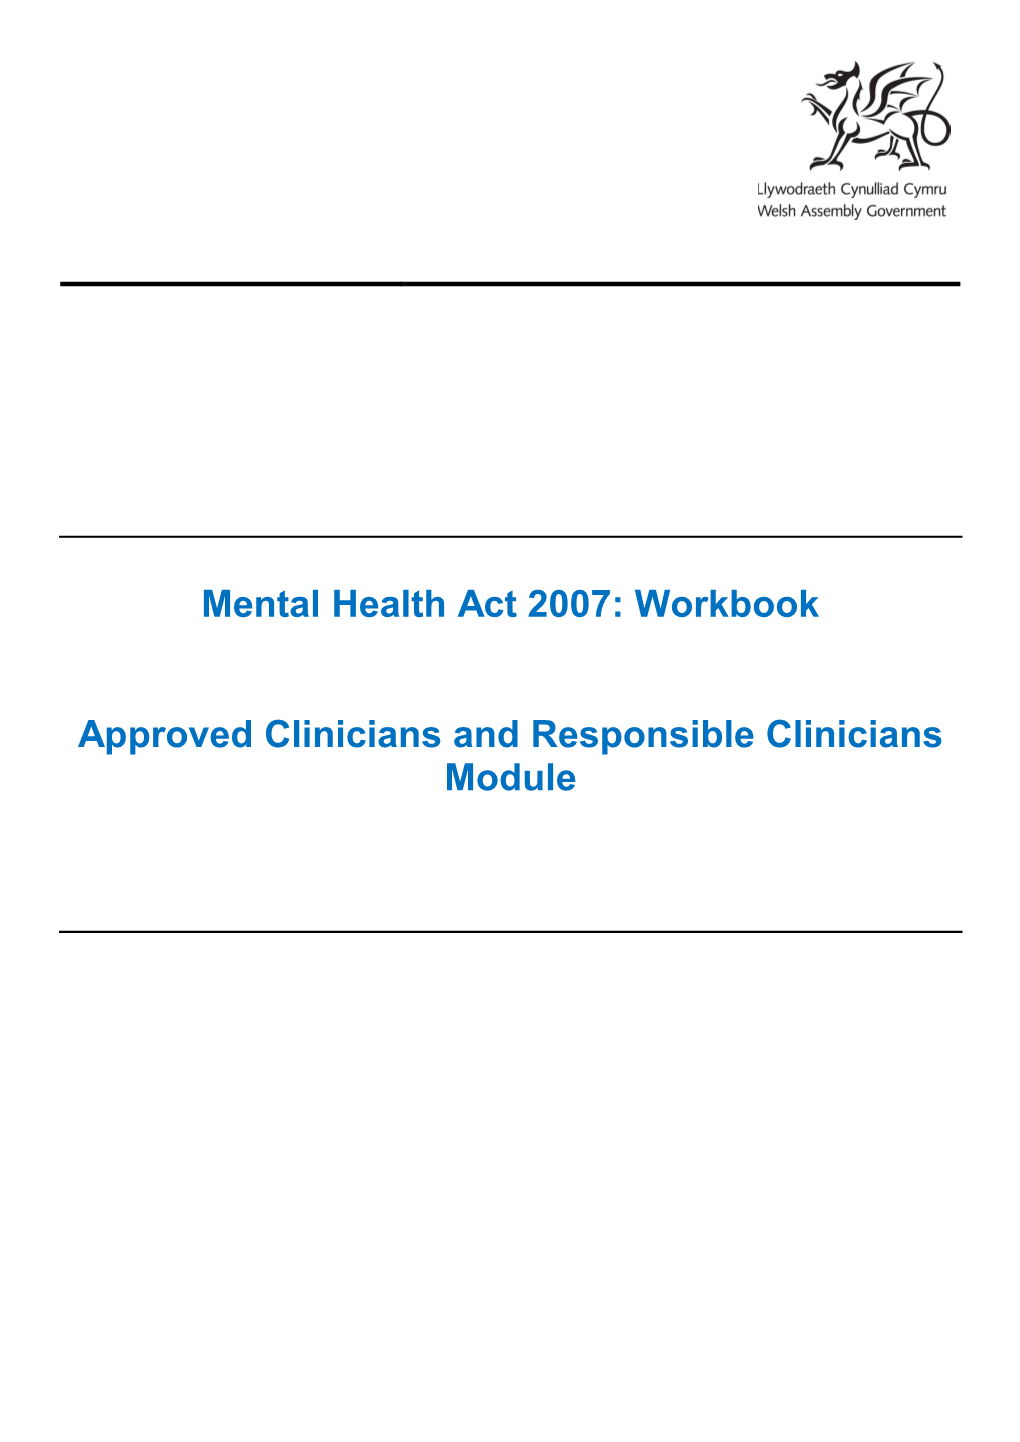 Mental Health Act 2007: Workbook Approved Clinicians And